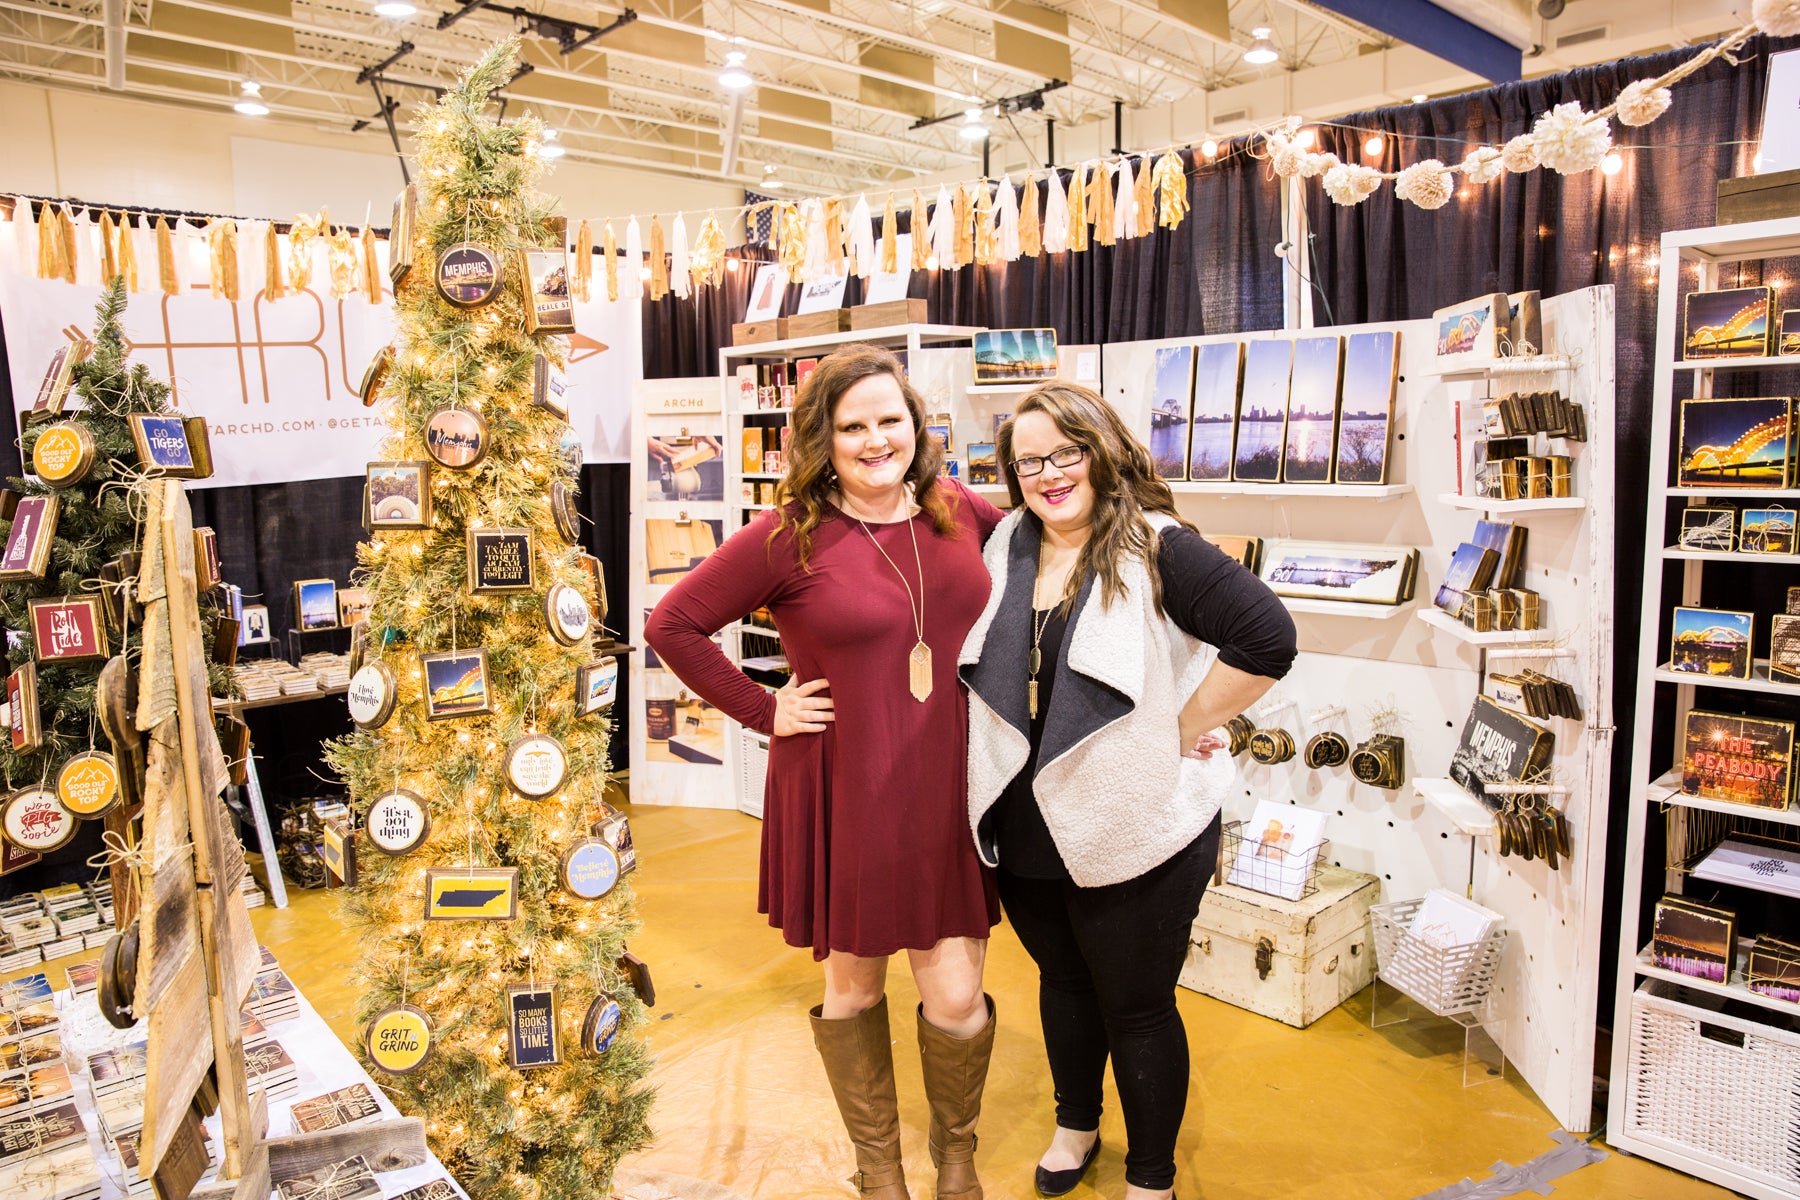 Vendor booth craft show display ideas inspiration ARCHd sisters Kristen Lindsey Archer